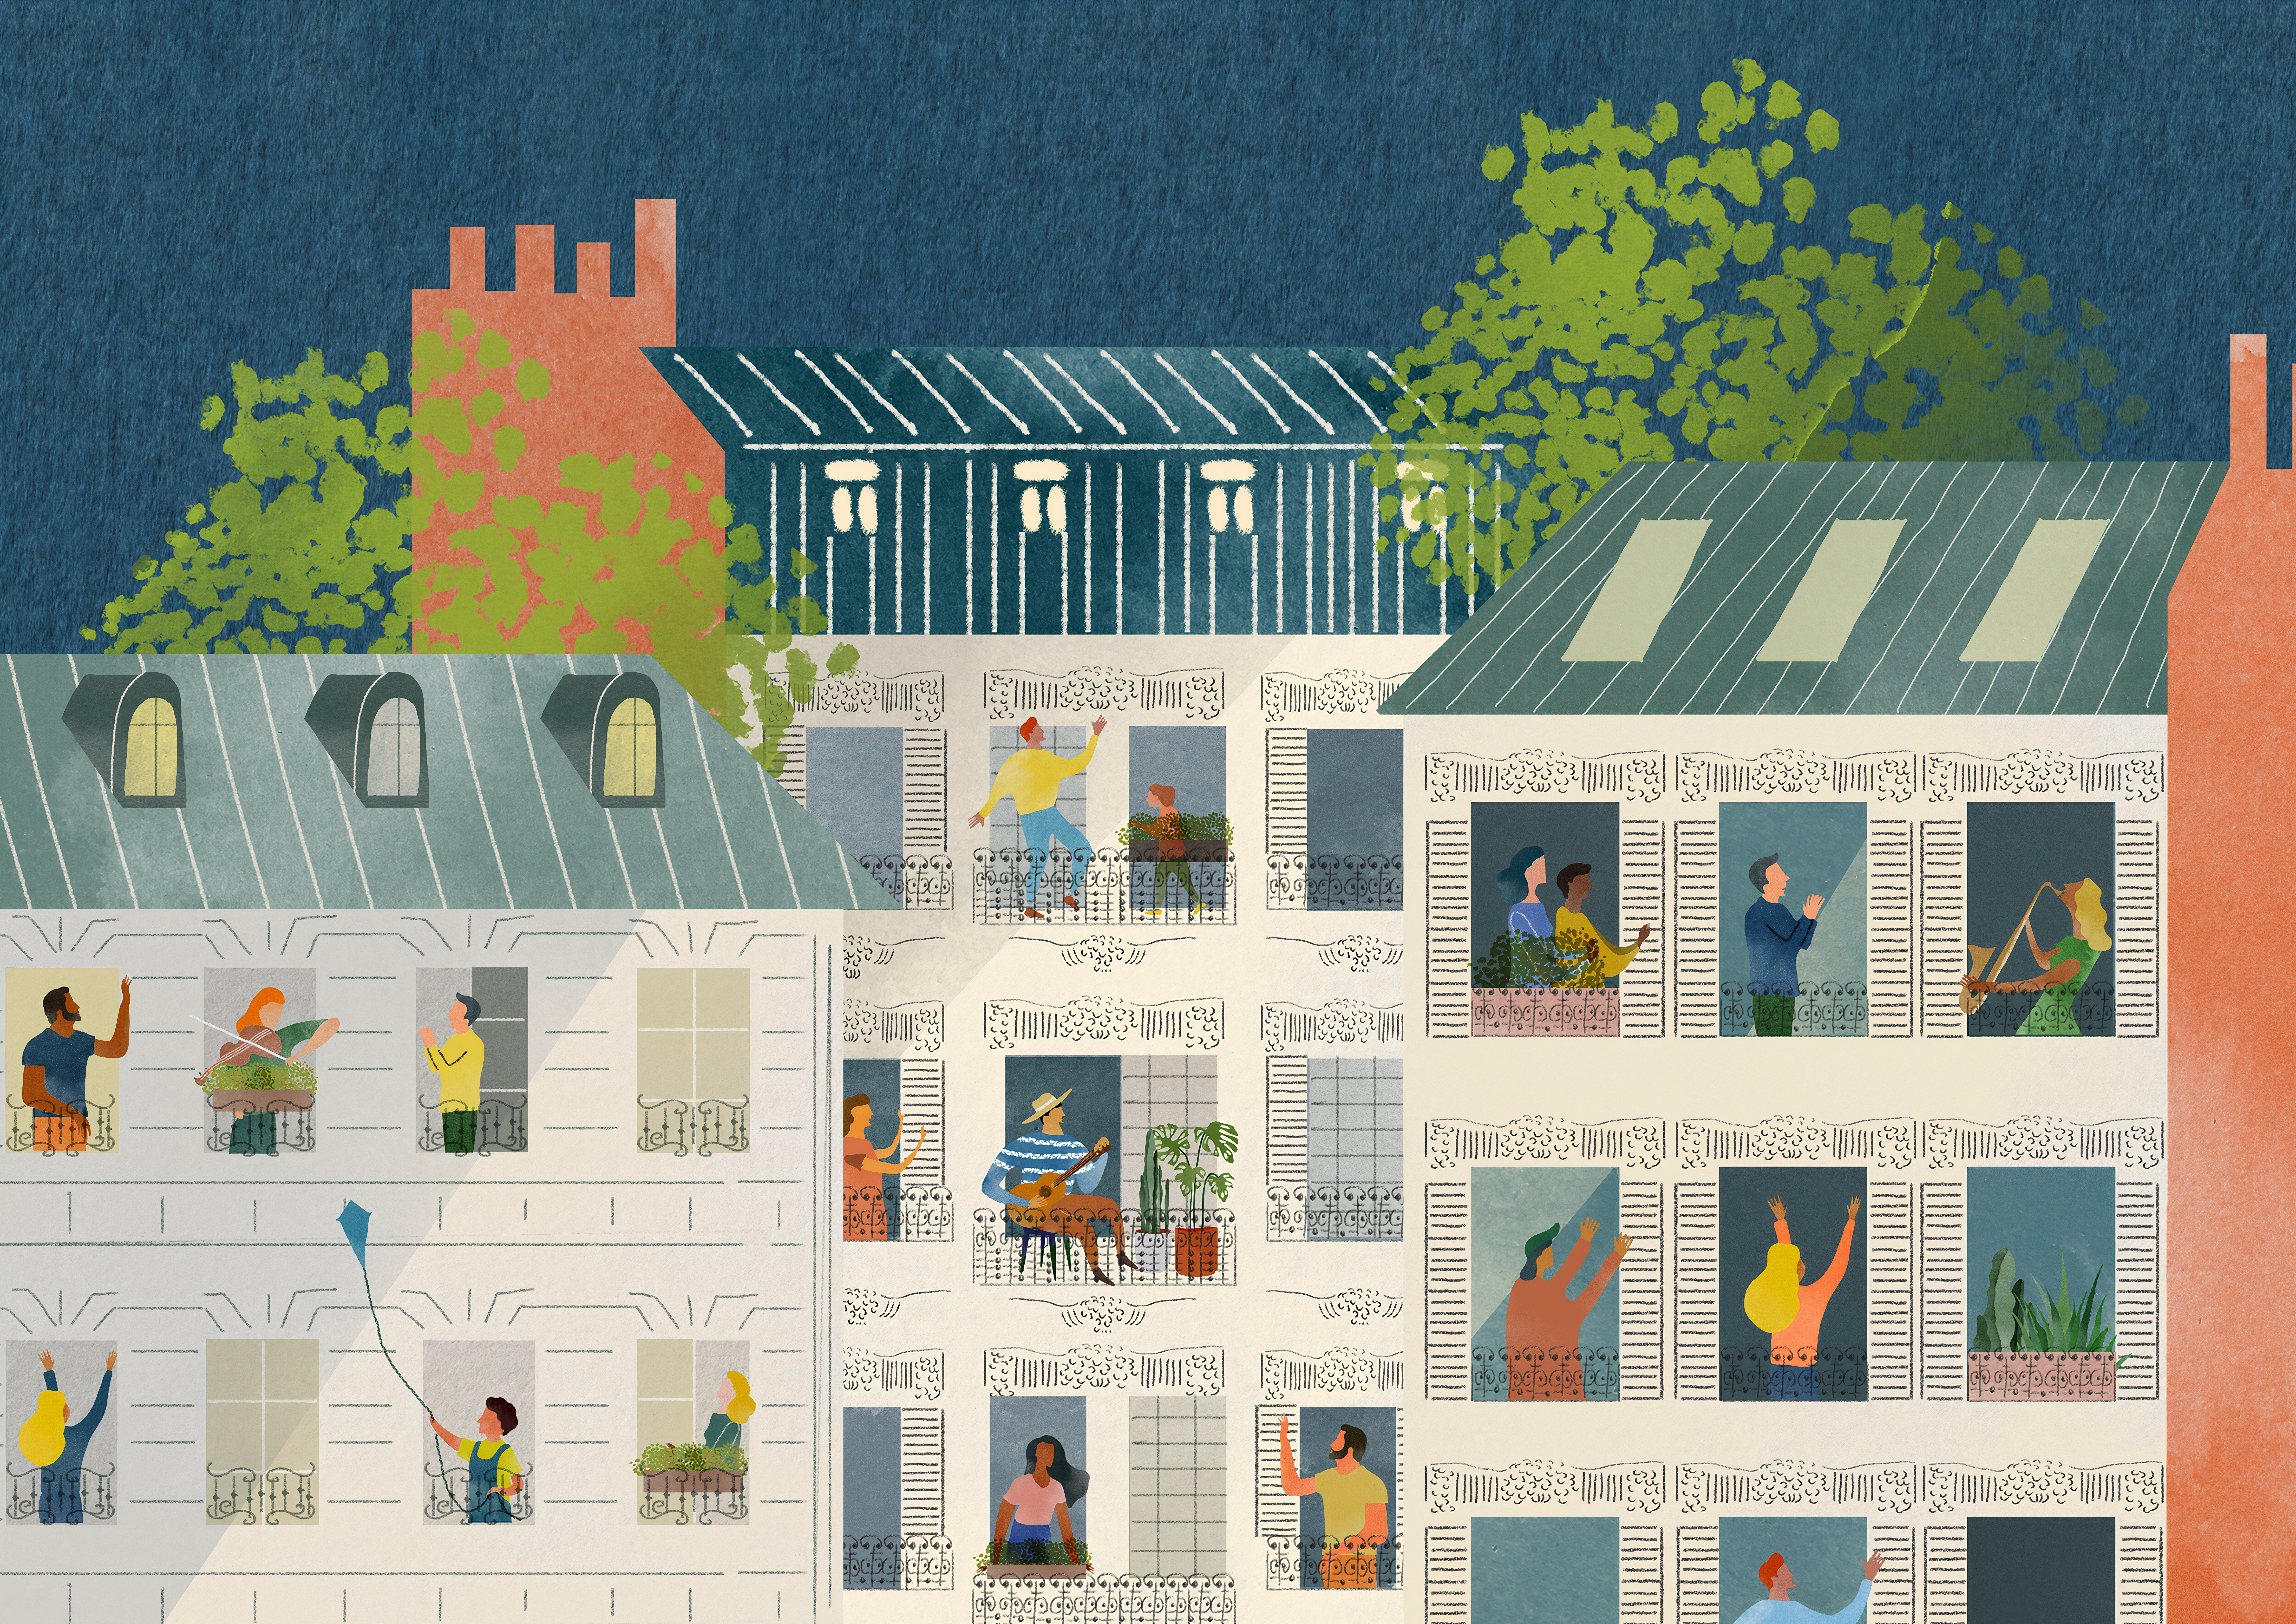 Illustration featuring a vibrant community dancing, living, playing music and celebrating on their balconies.  It seems like a very vibrant and happy community